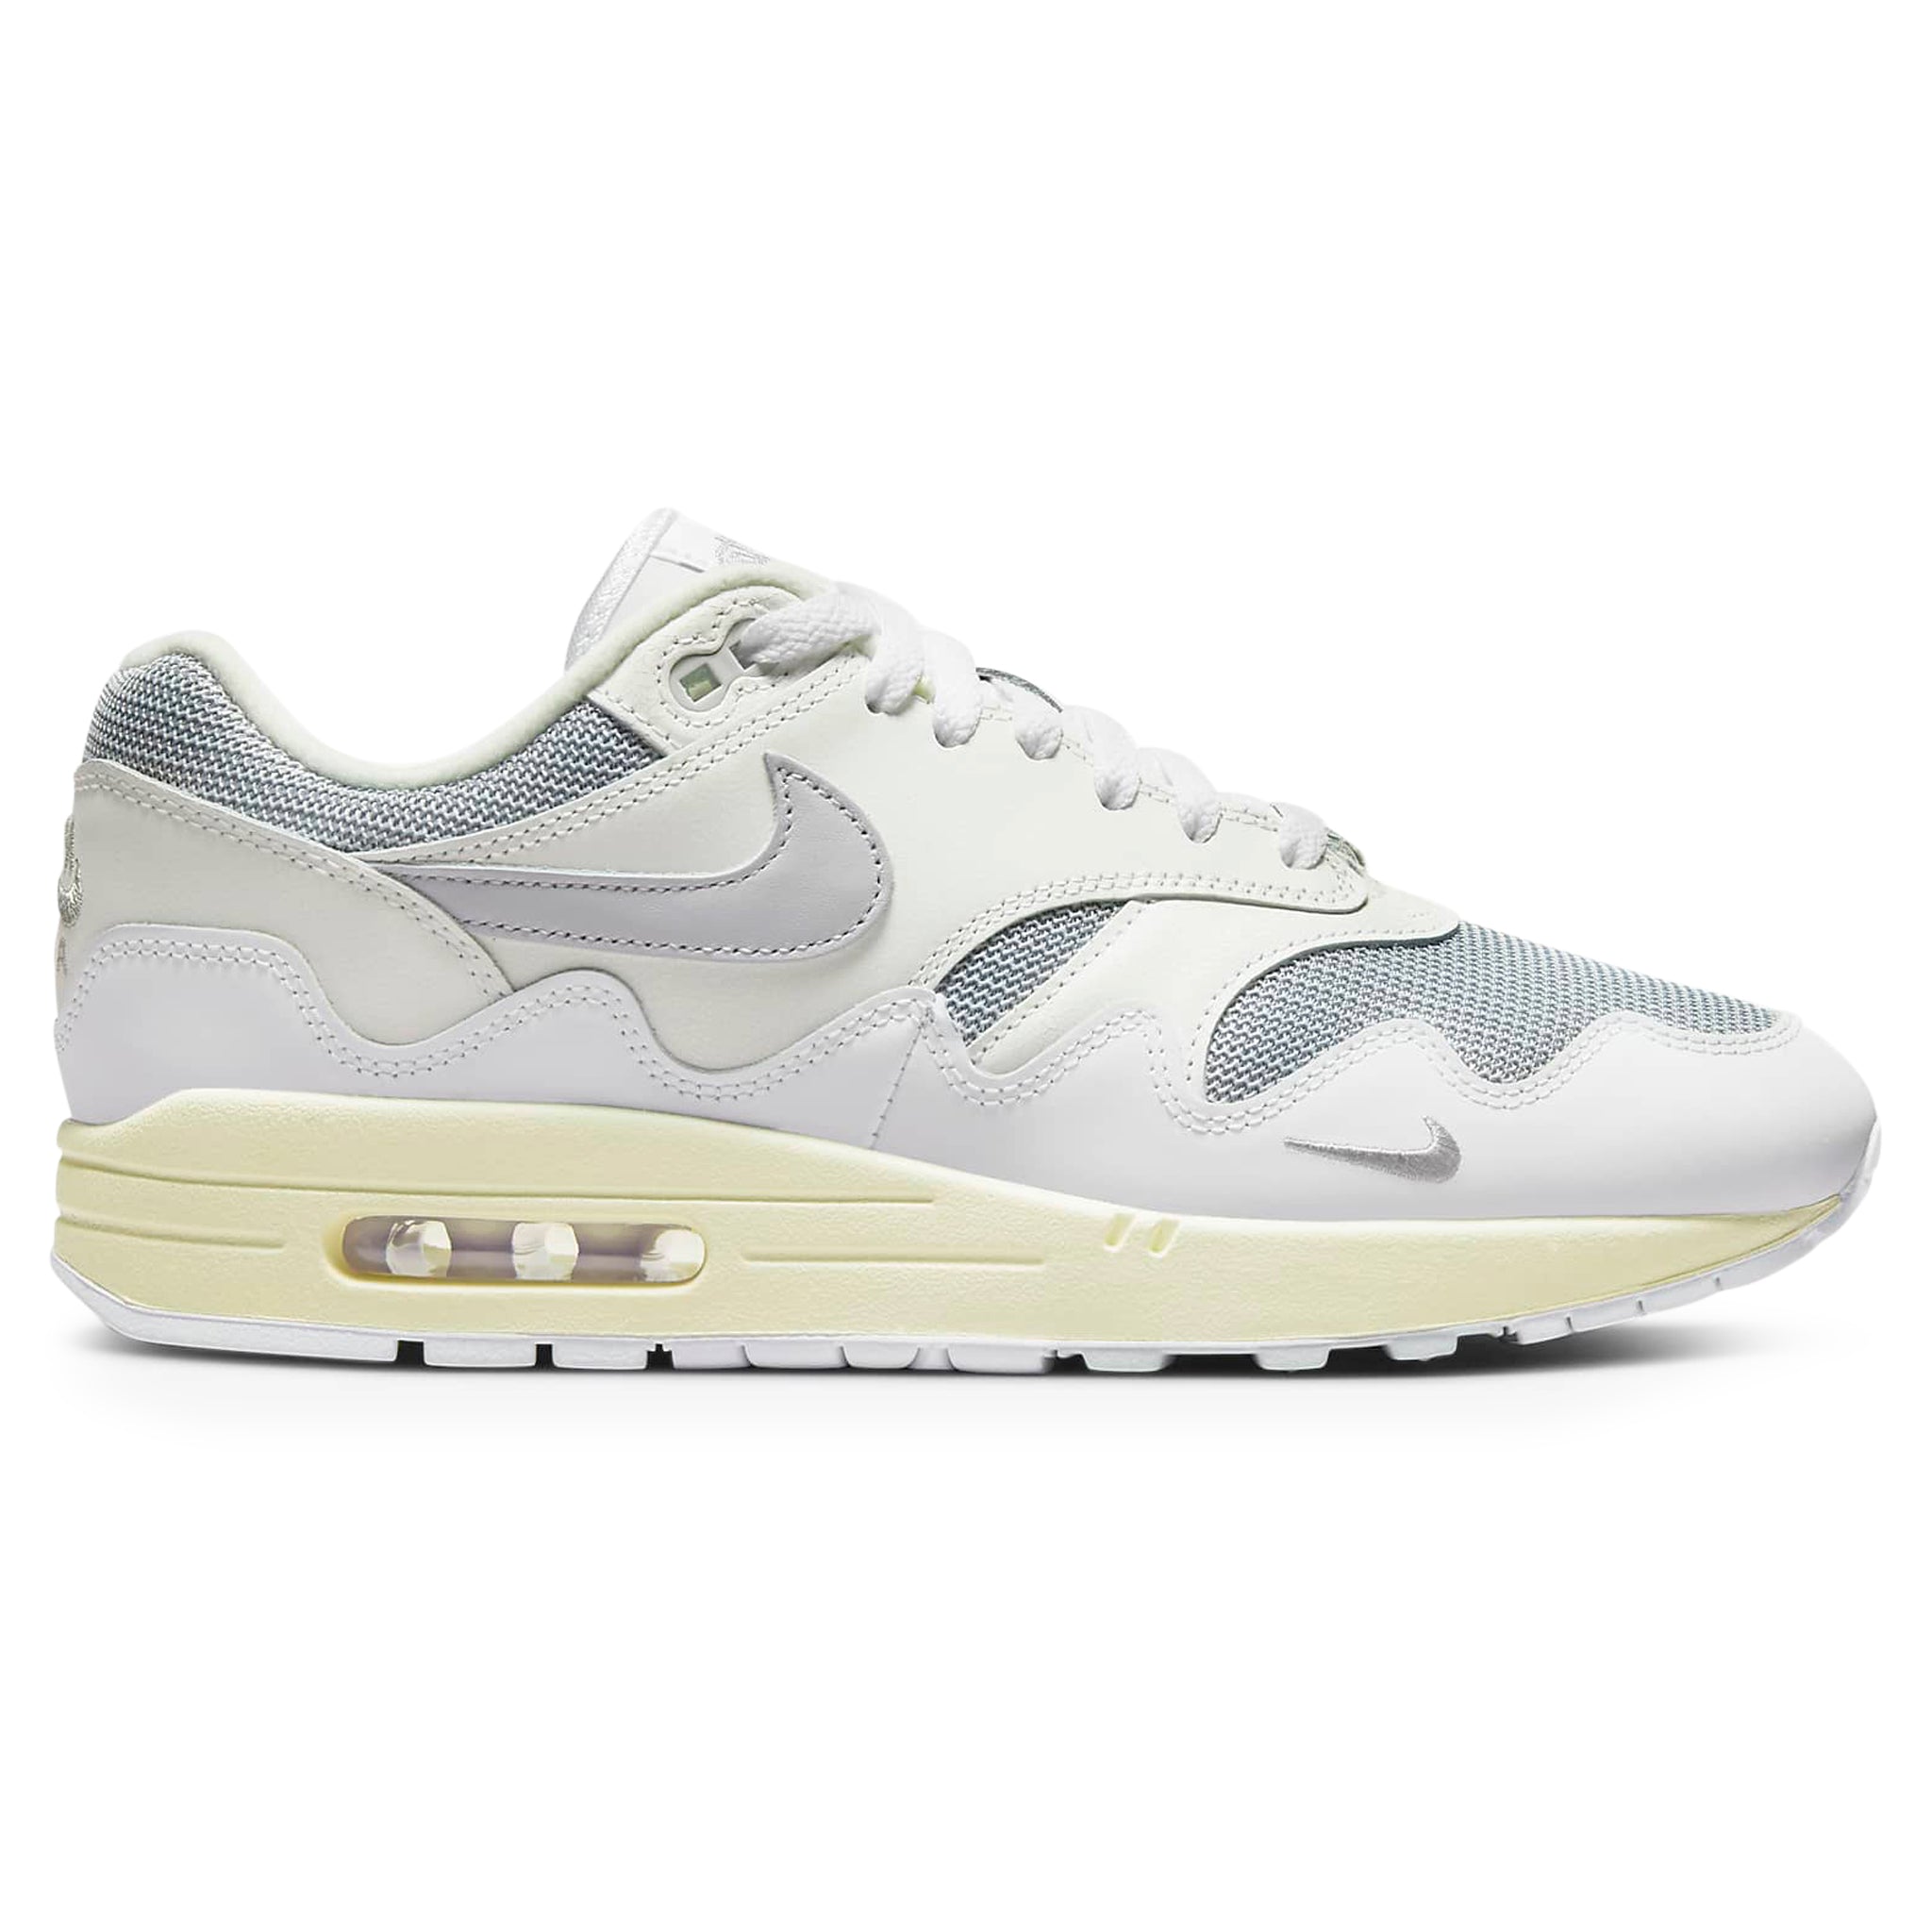 Side view of Nike Air Max 1 Patta Waves White DQ0299-100